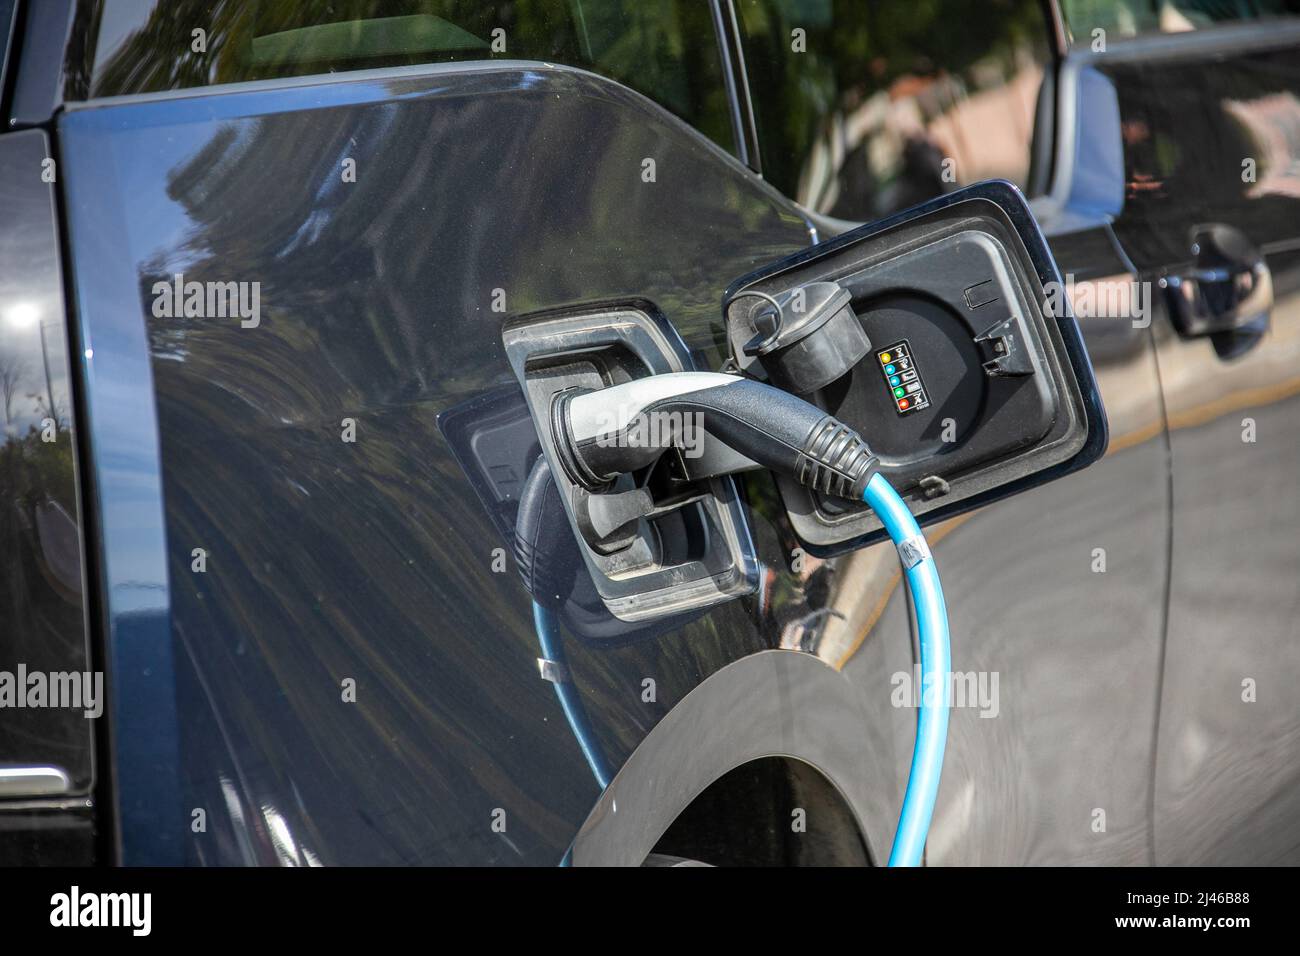 BMW i3 EV Electric Vehicle charging at a Galp Electric charger, Lisbon, Portugal Stock Photo